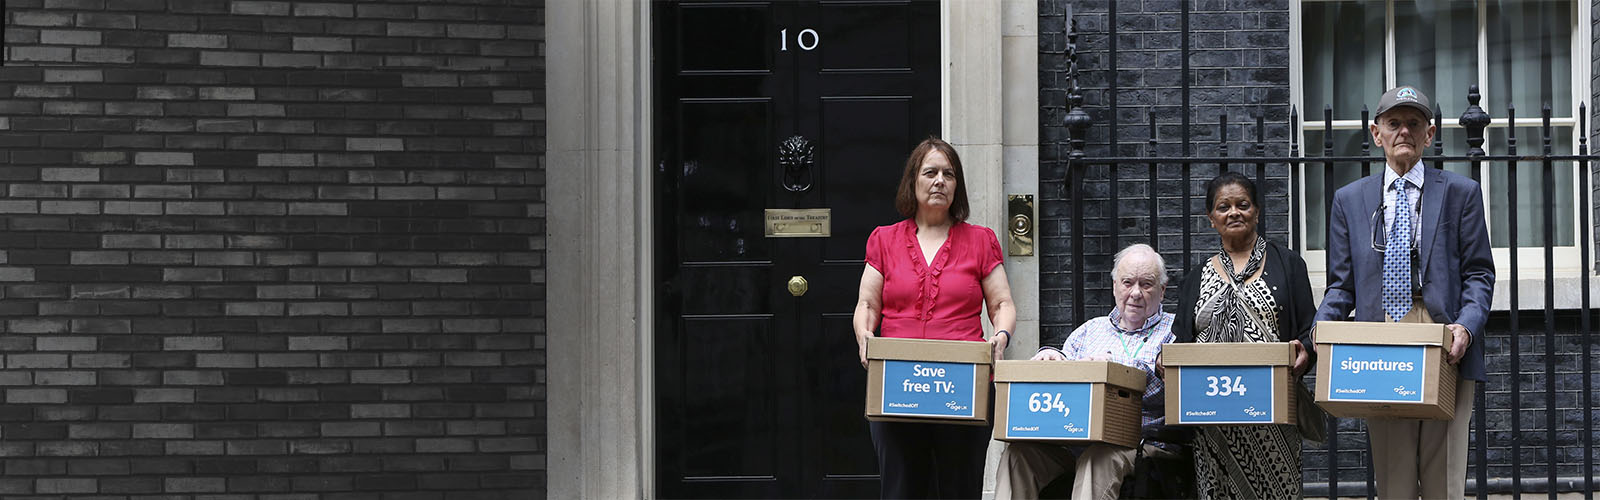 ̽Ƶ campaigners hand in a petition to 10 Downing Street